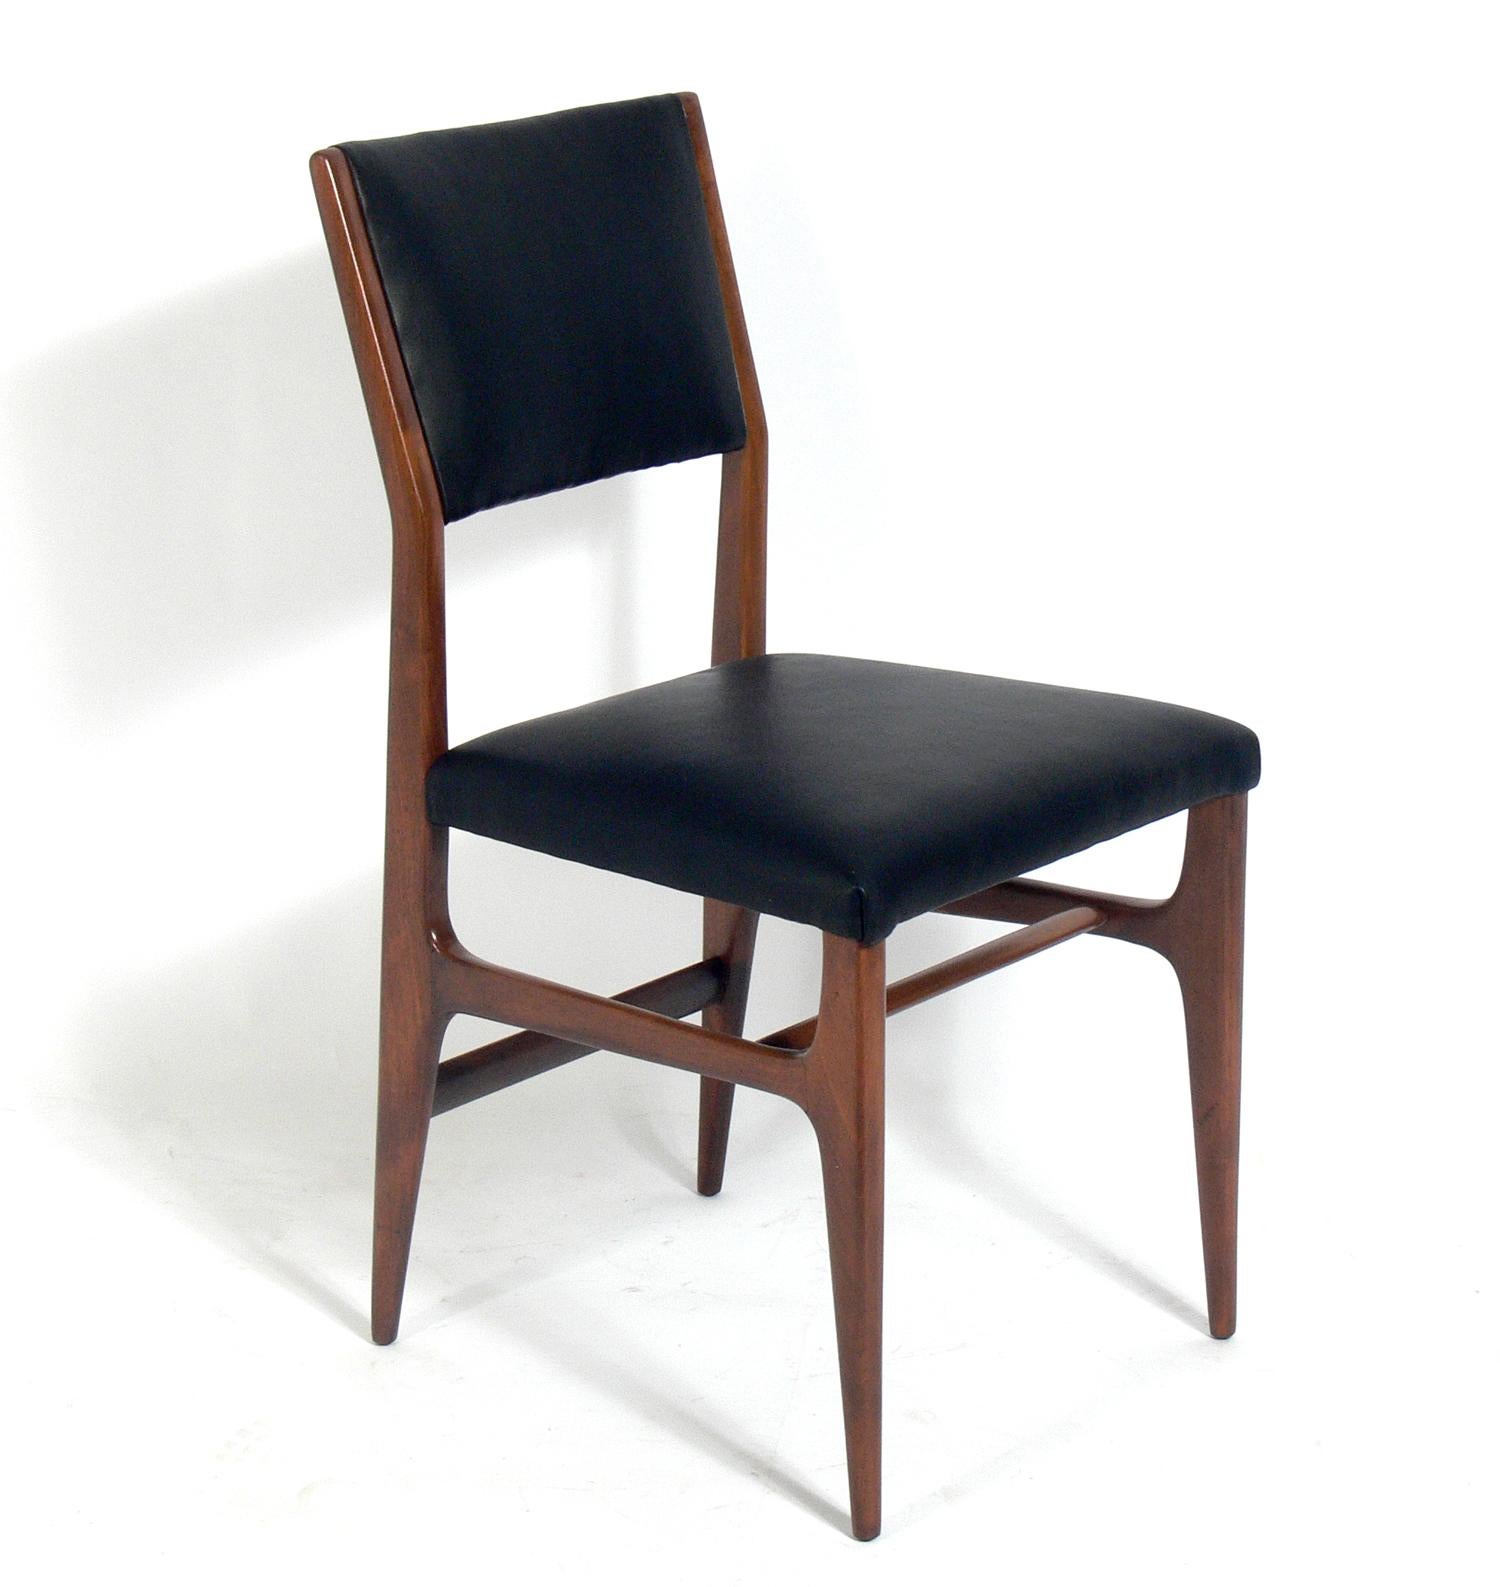 Modernist Italian dining chairs, designed by Gio Ponti for Singer and Sons, Italy, circa 1950s. They have been refinished and reupholstered in black leather. They are priced at $2800 each.